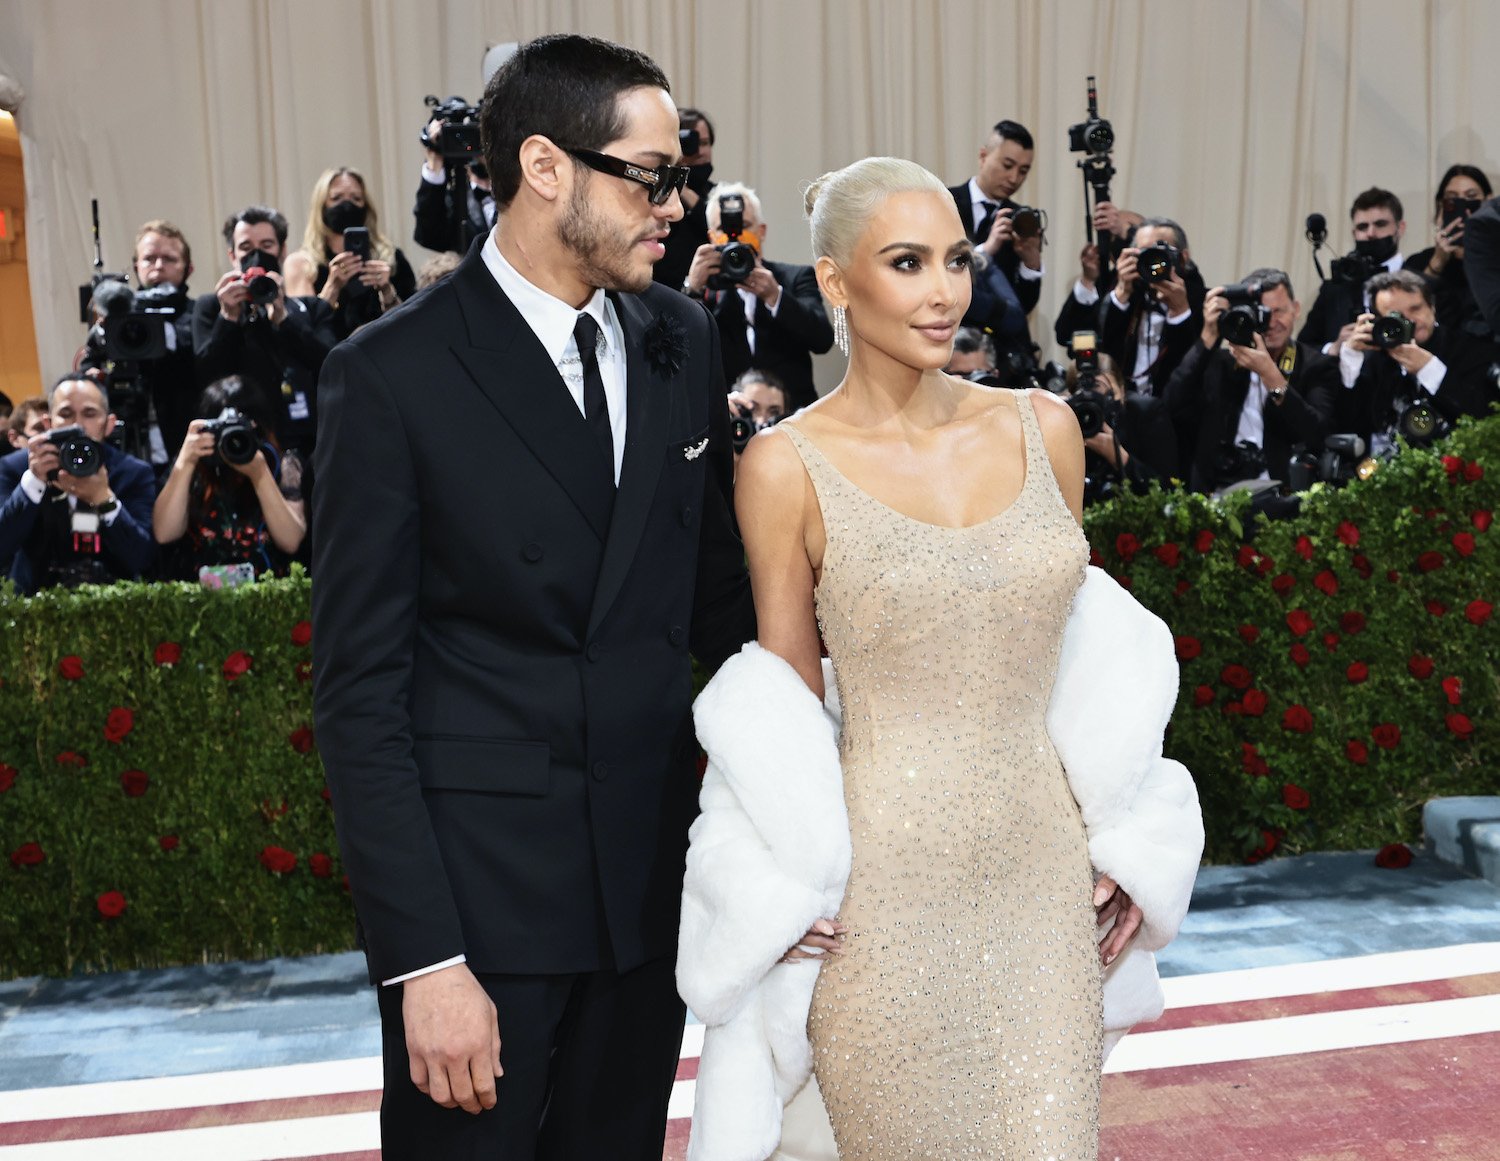 Kim Kardashian wears a nude colored sequin dress originally worn by Marilyn Monroe to the Met Gala 2022 with boyfriend Pete Davidson in a black suit and tie